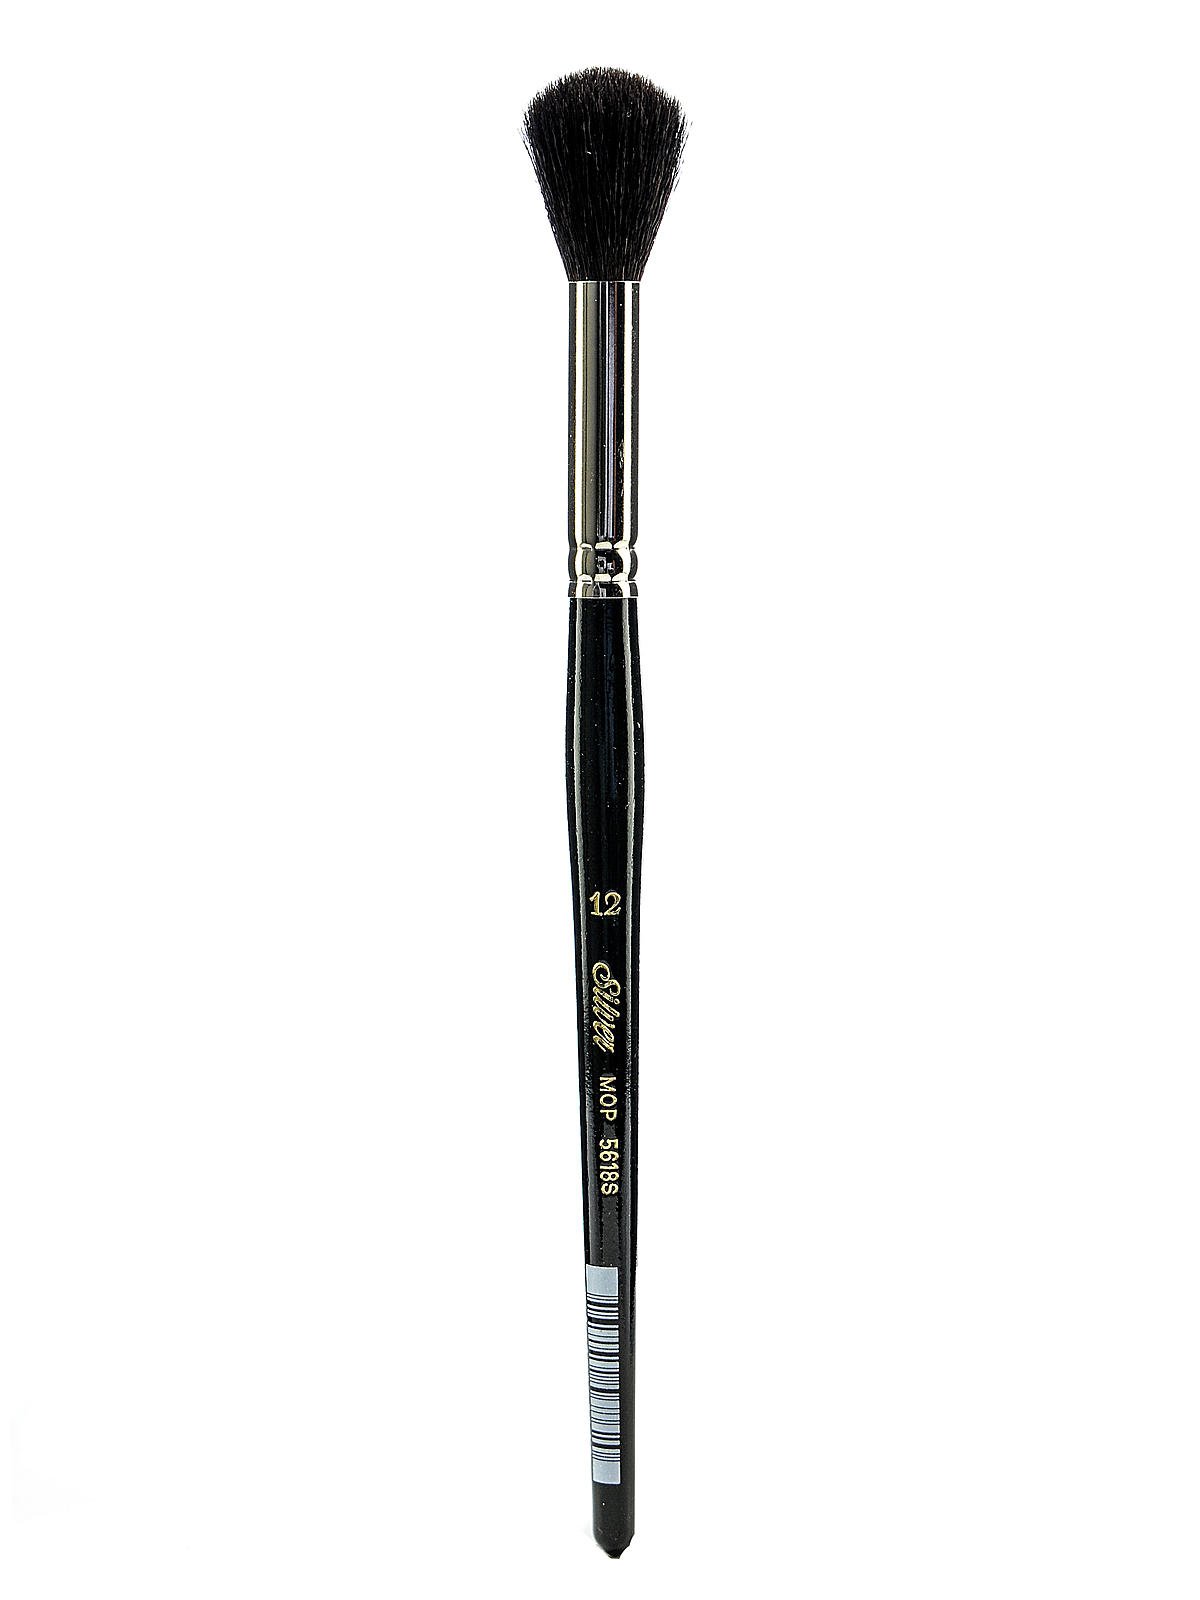 Black Round Mop 5618S-12 by Silver Brush